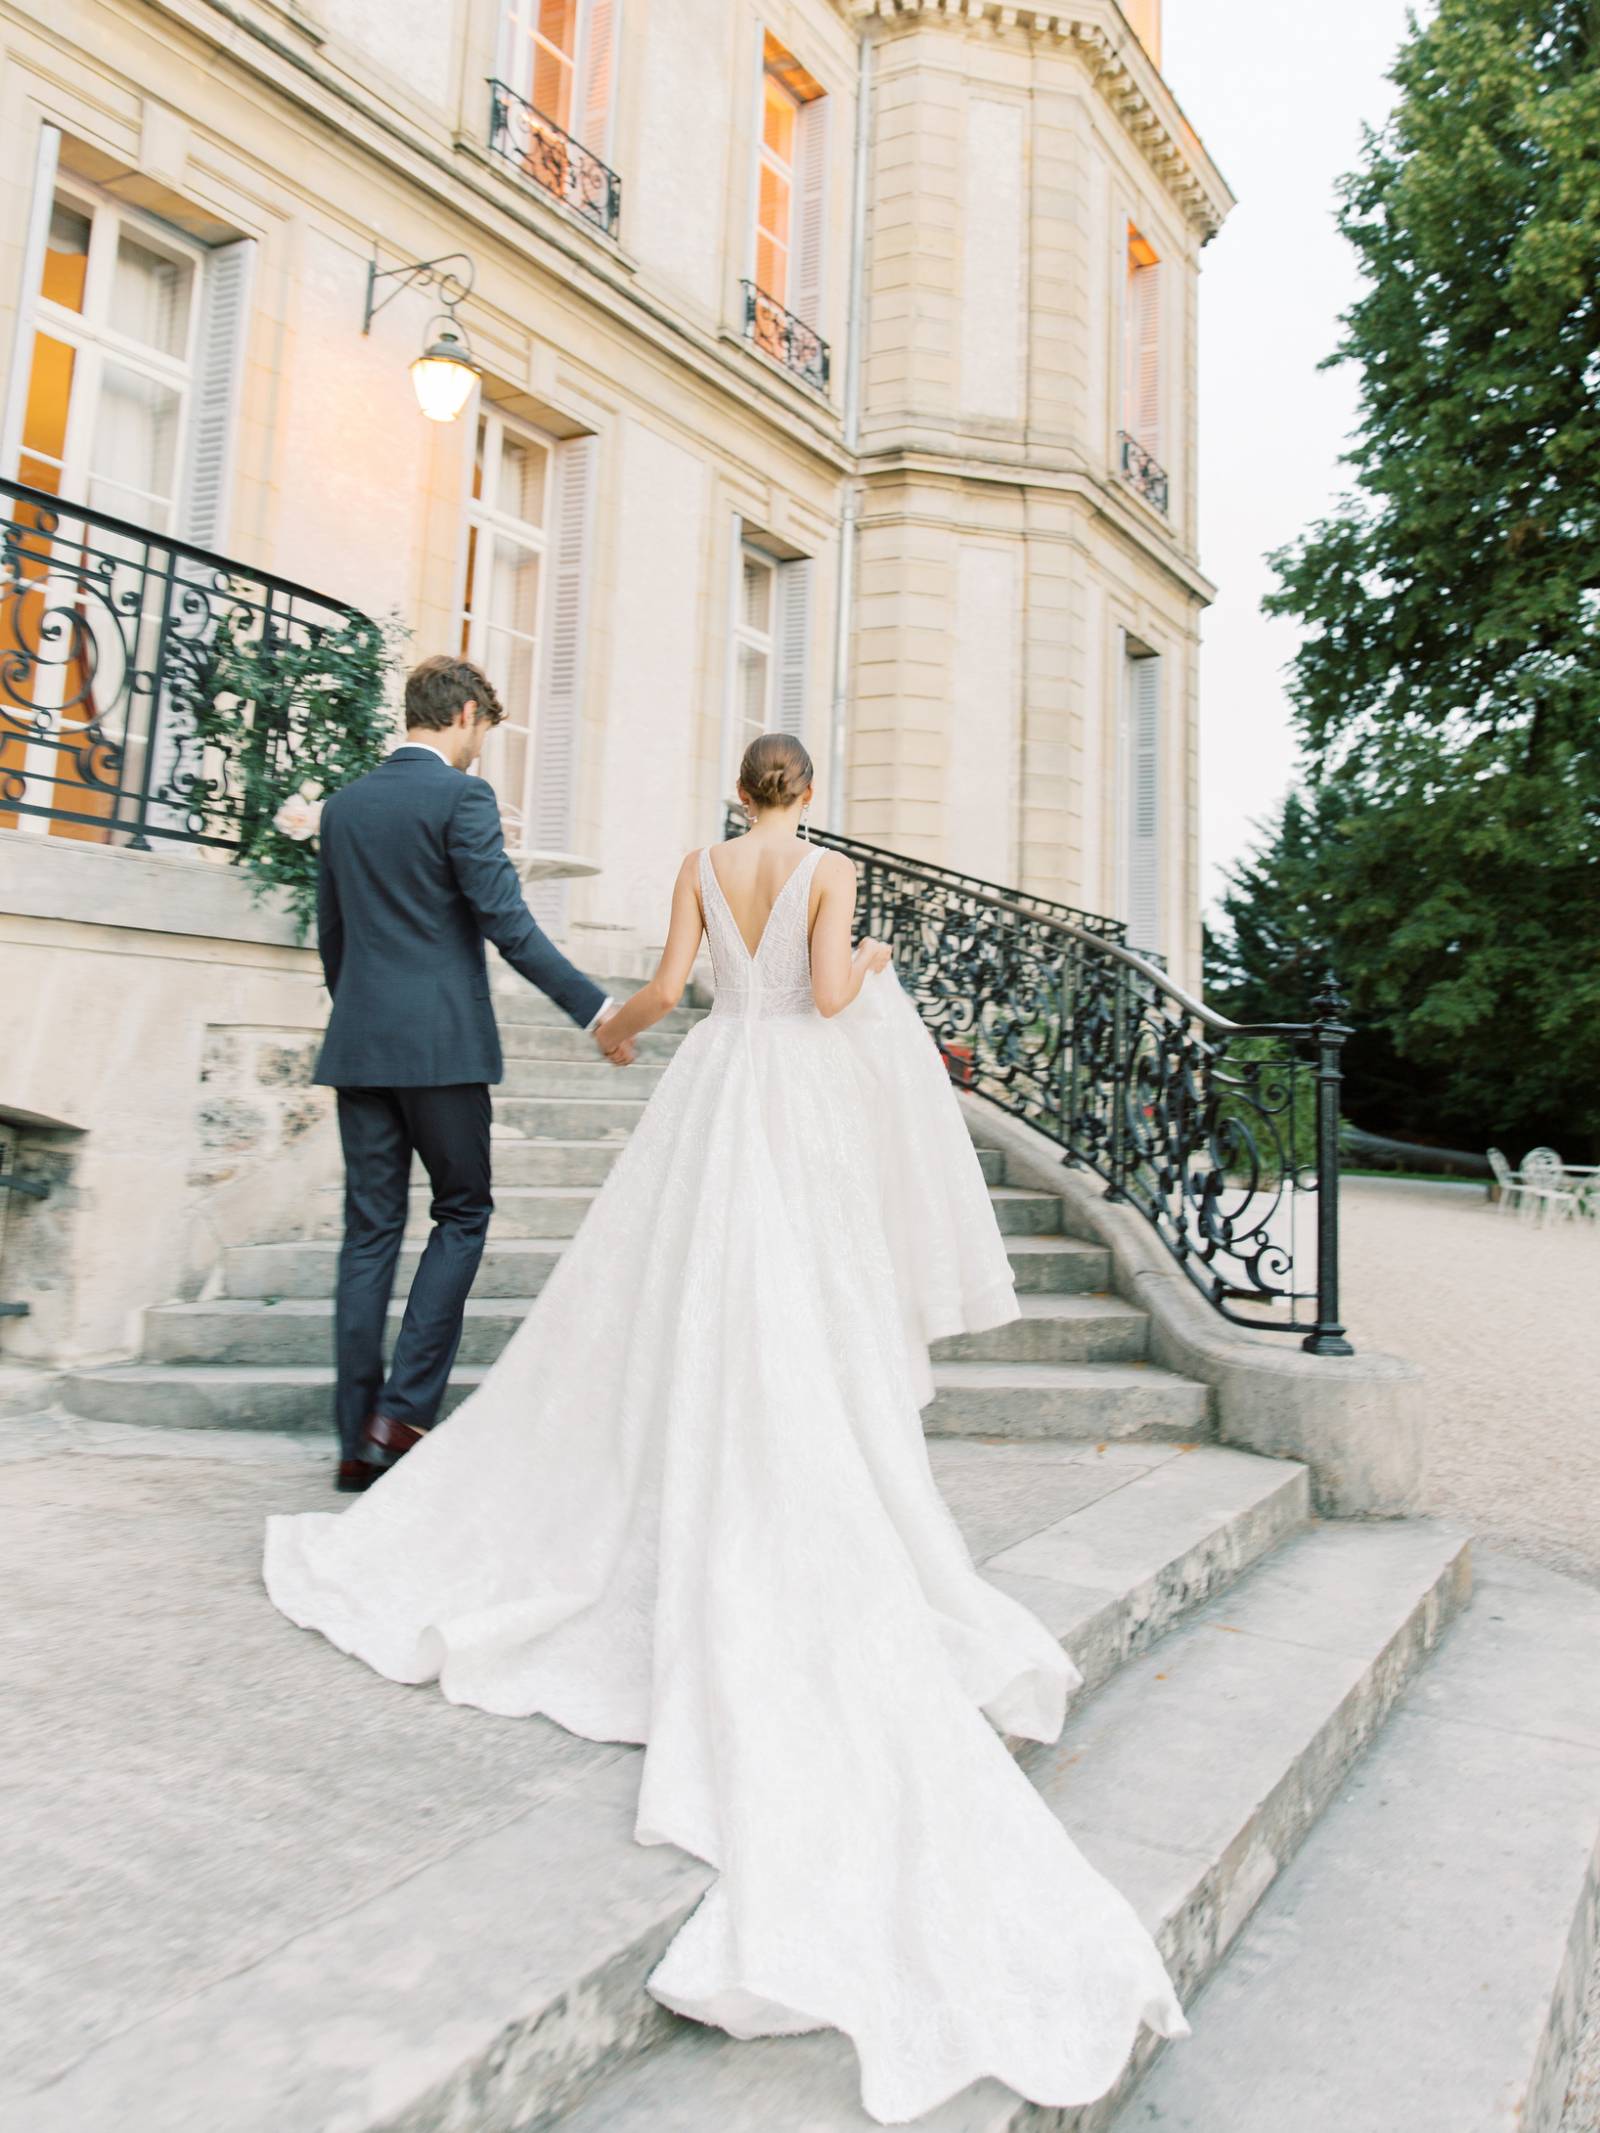 A Parisian love story inspired by classical music and travel | Paris ...